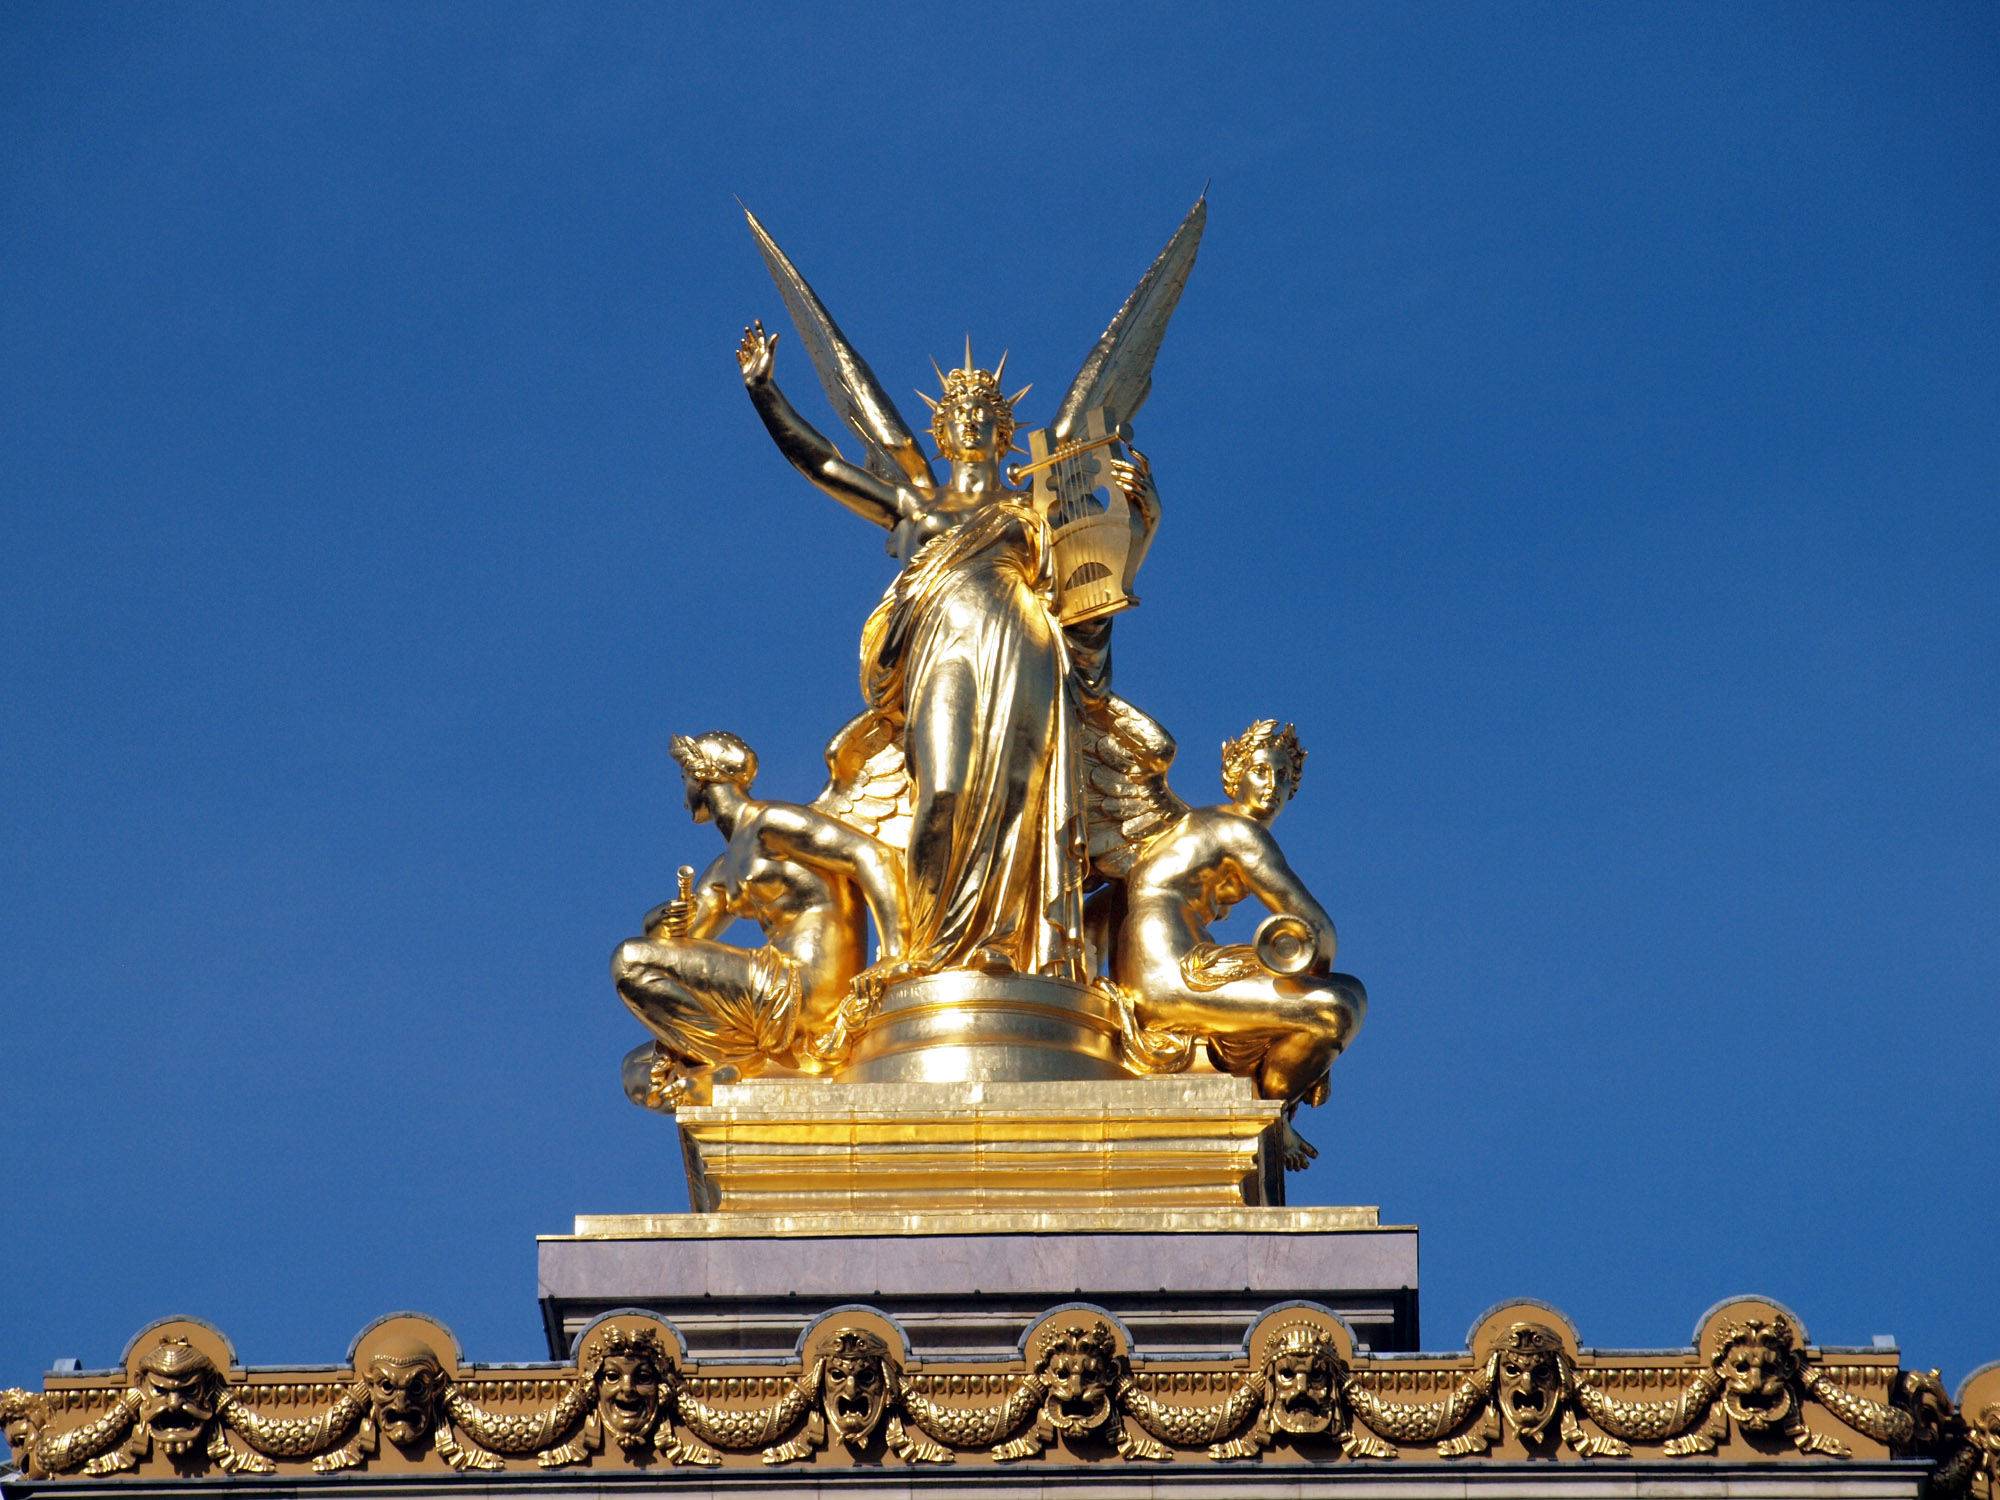 a golden statue with angel statues around it